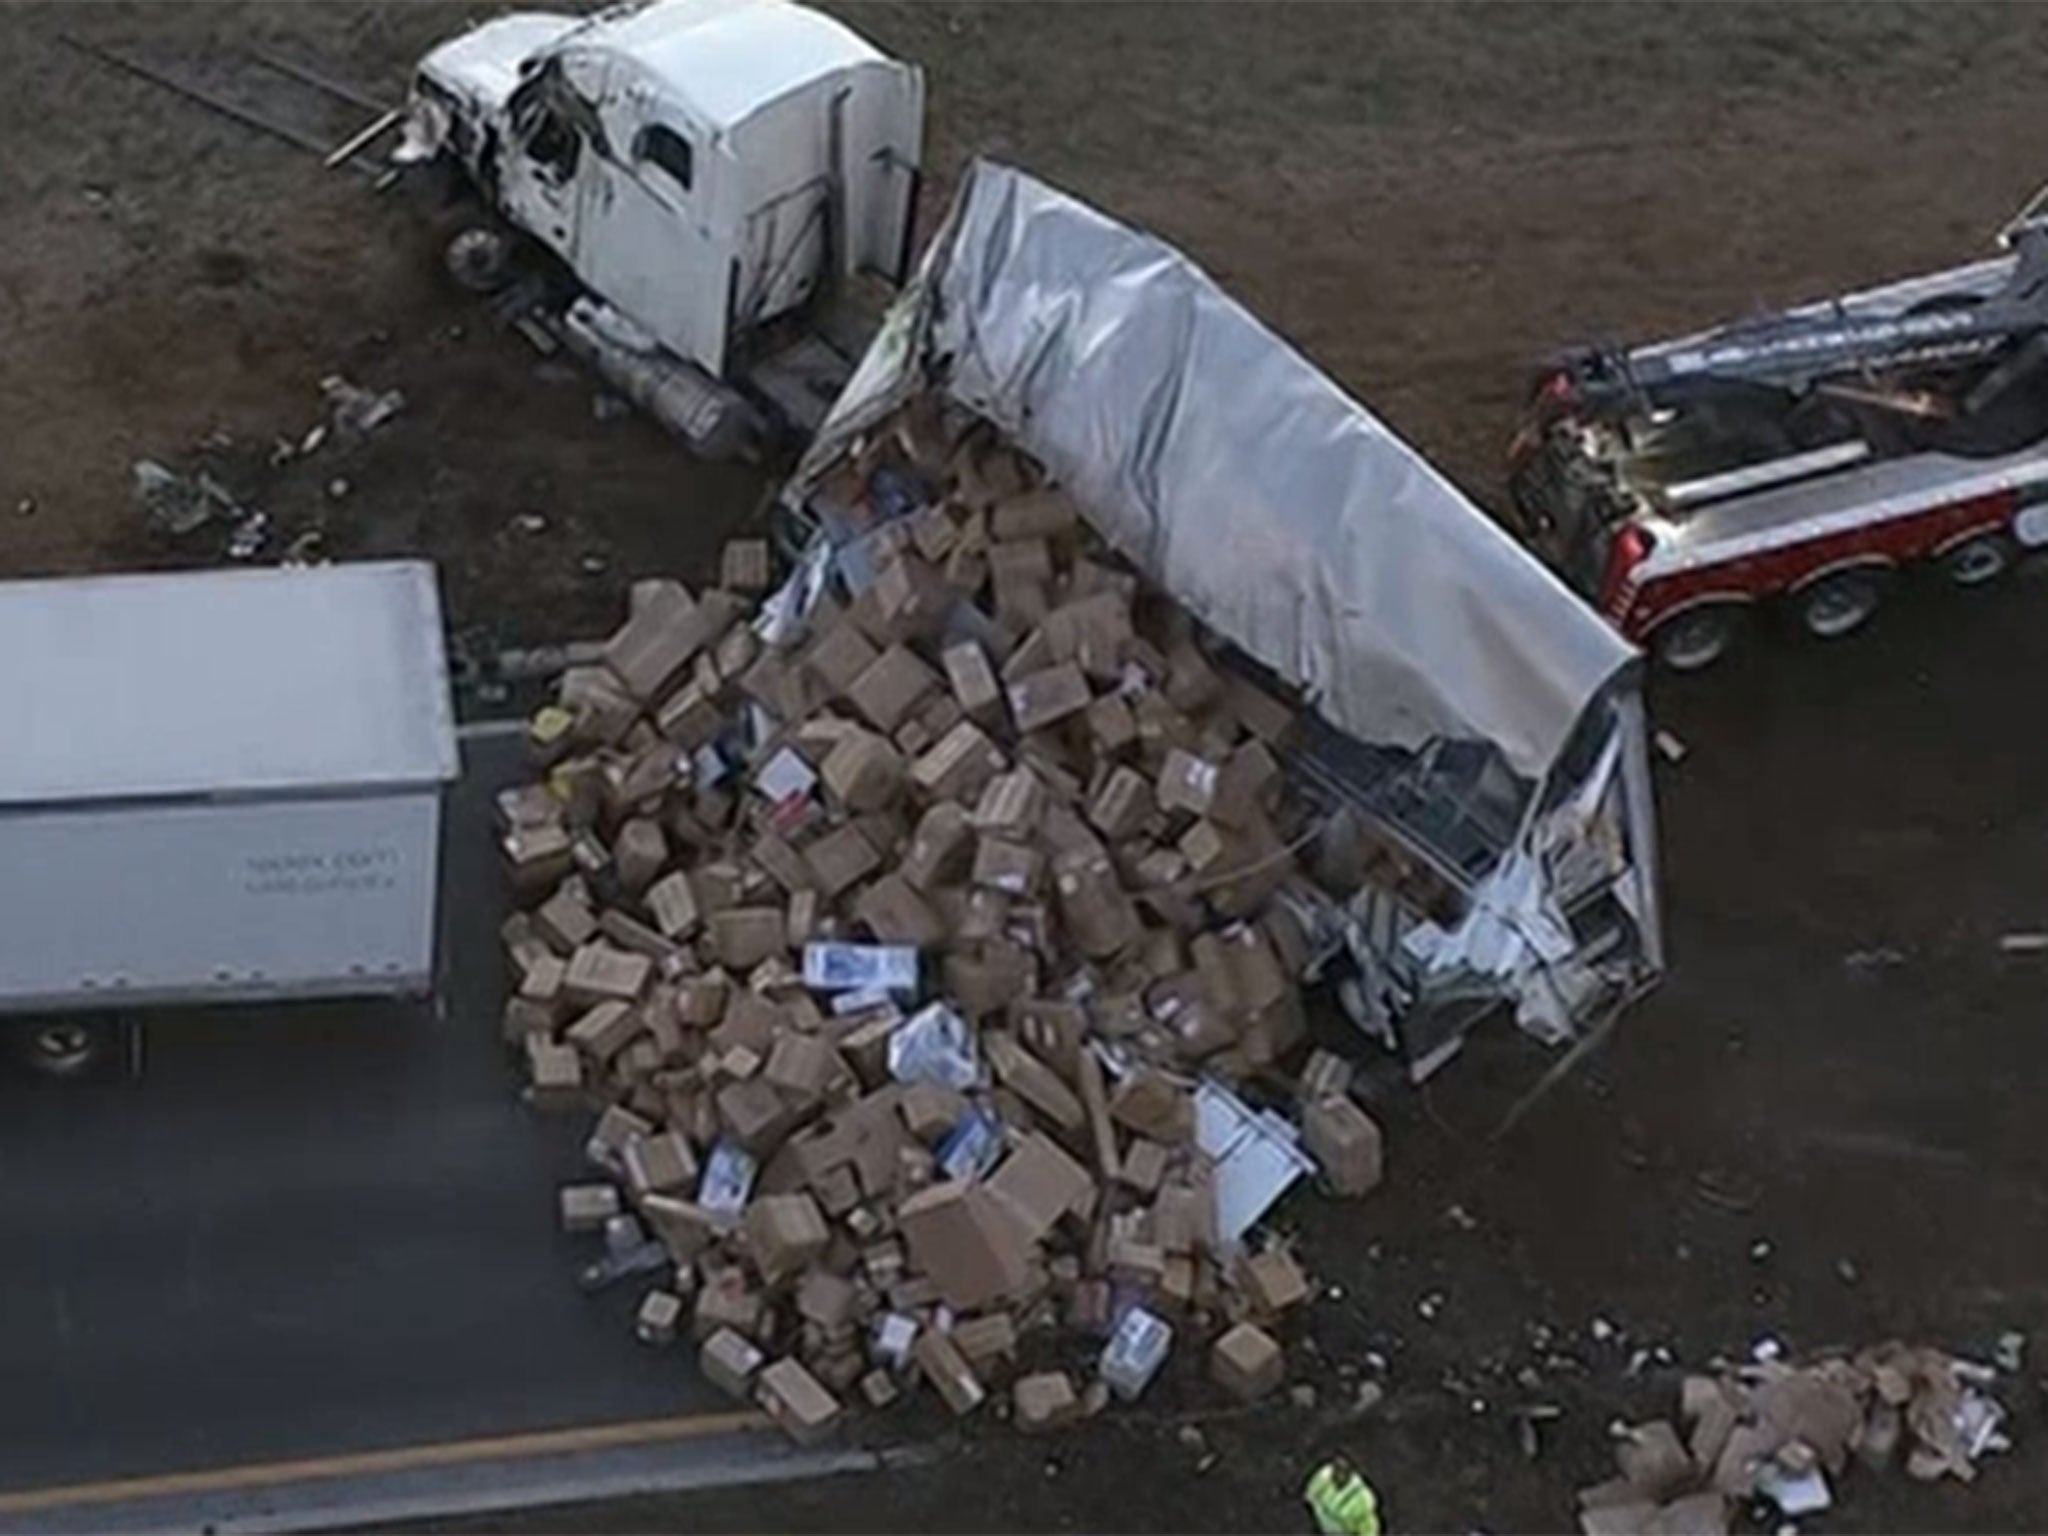 FedEx truck spills hundreds of packages on motorway on the busiest day in the company's history.